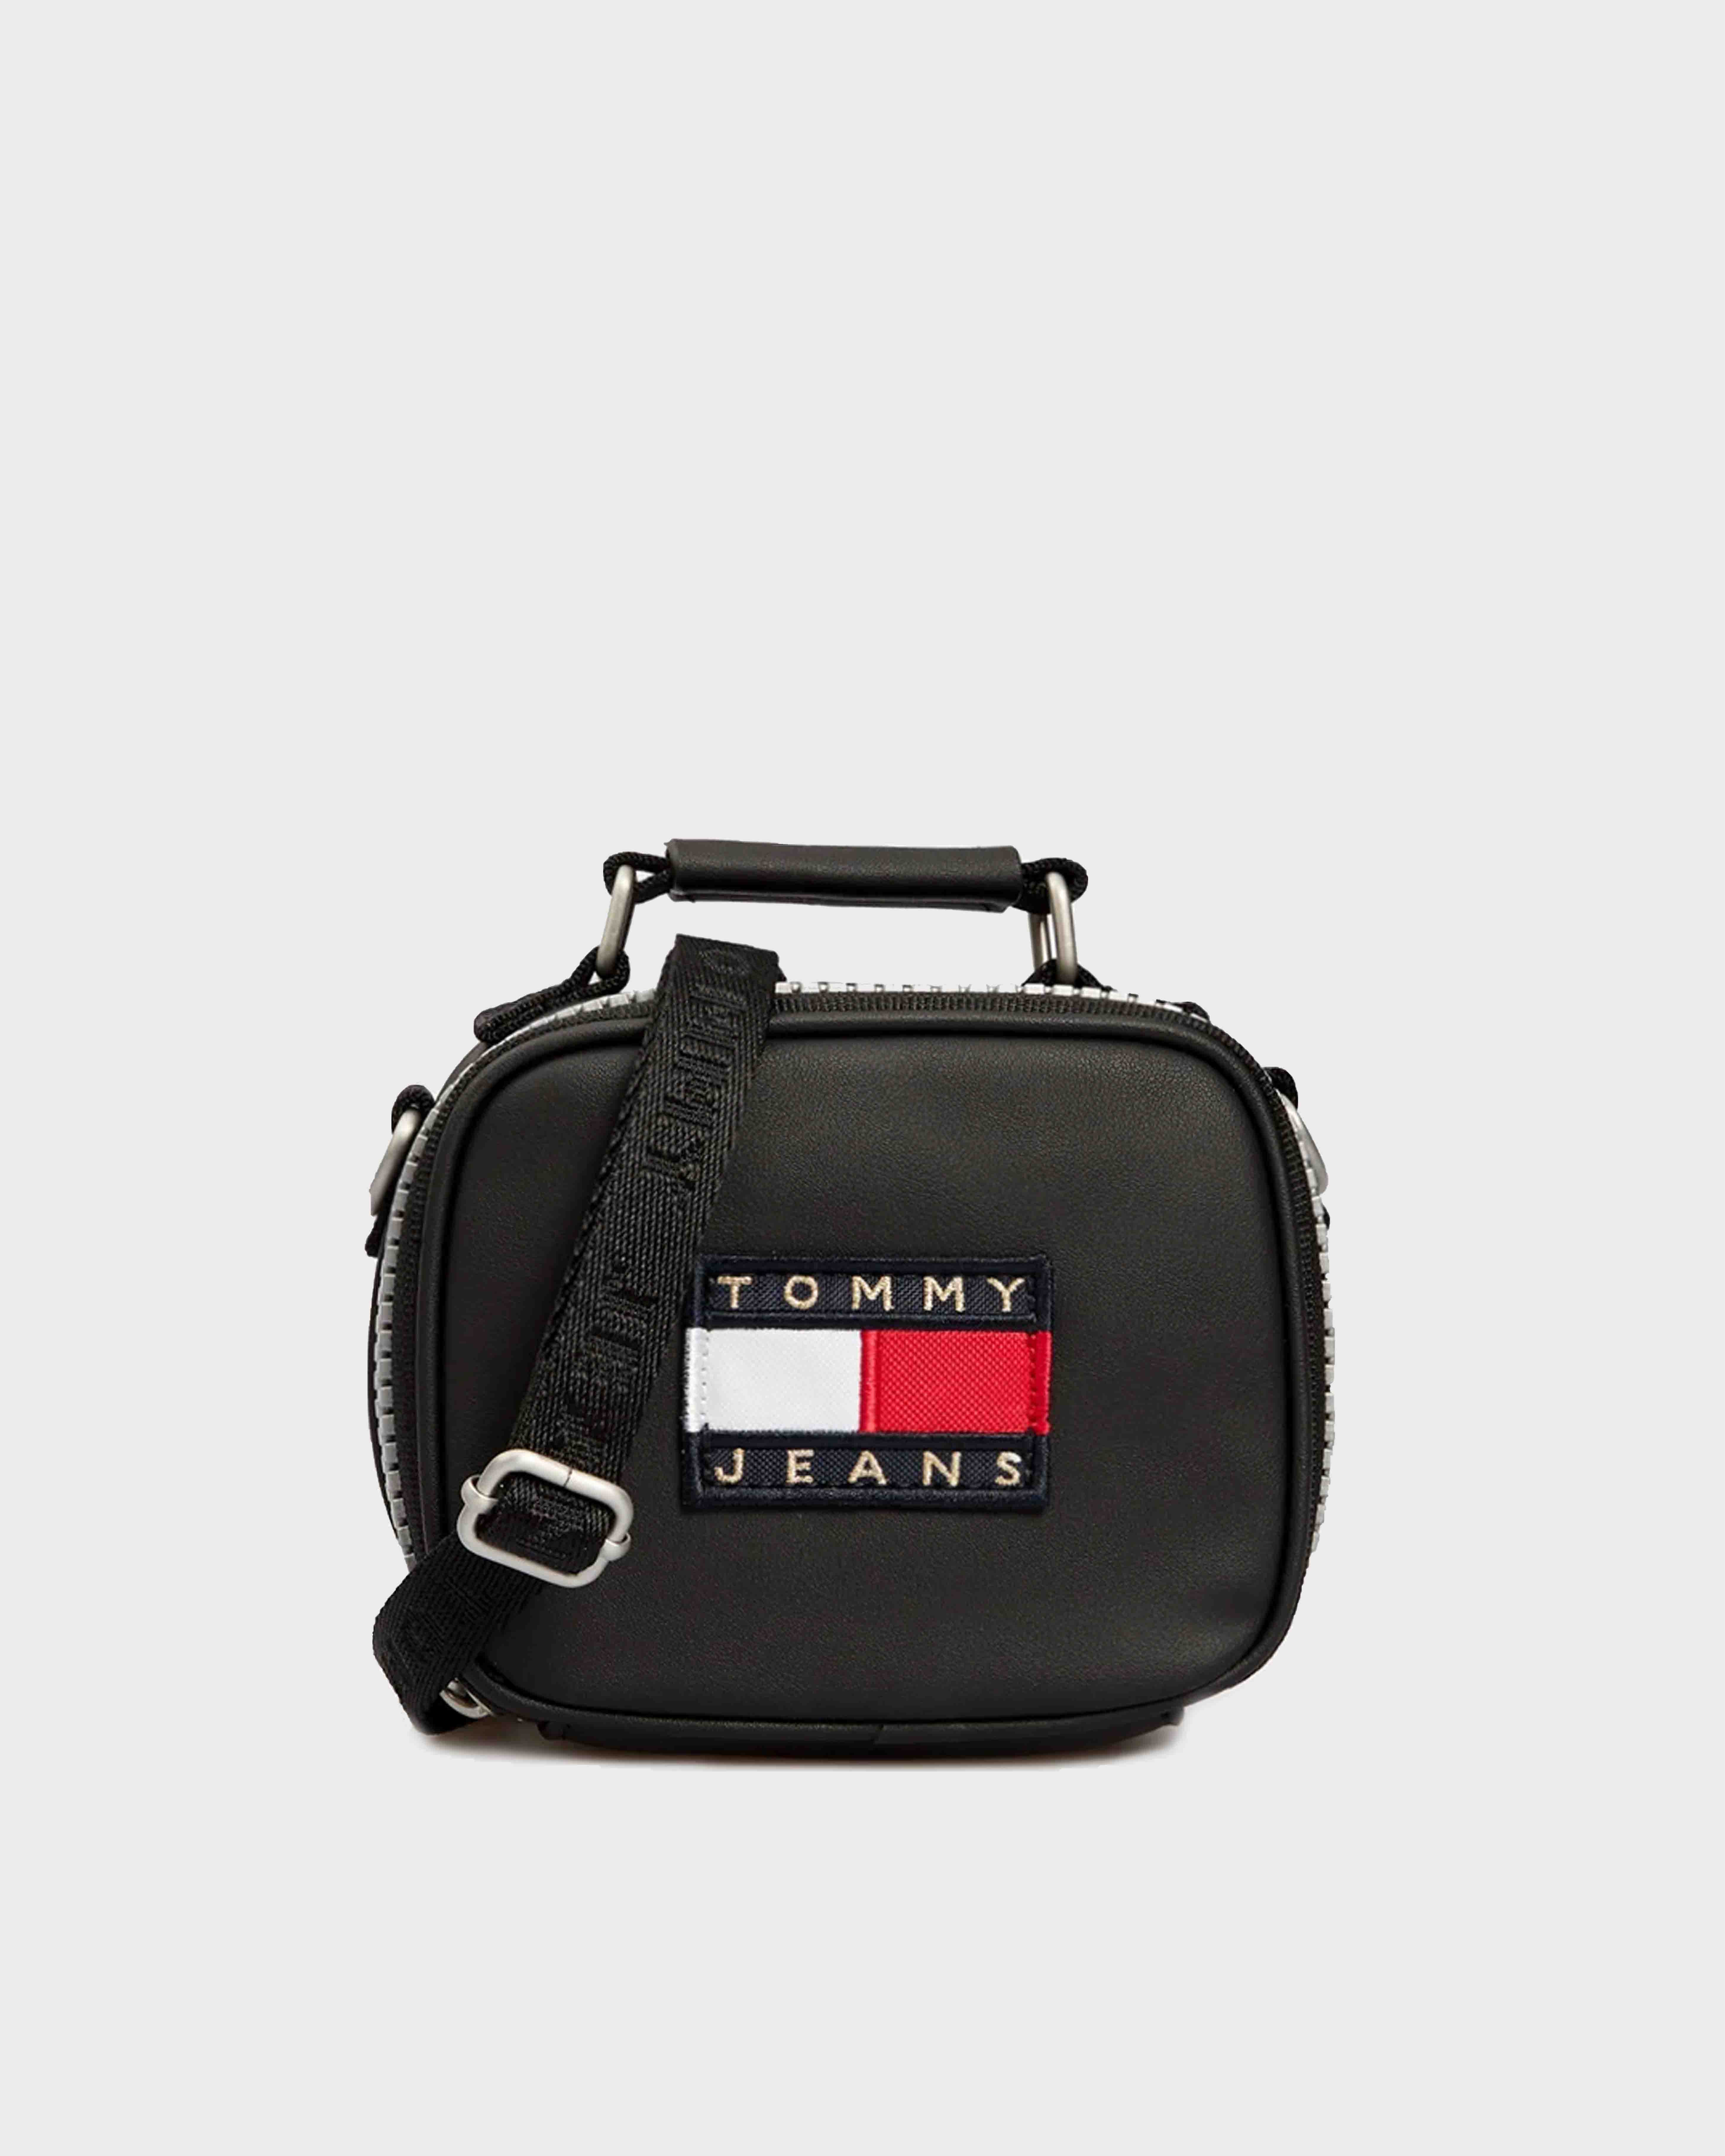 TOMMY HILFIGER HERITAGE NANO CROSSOVER WOMEN'S BAG - AW0AW10899 -  sagiakos-stores.gr